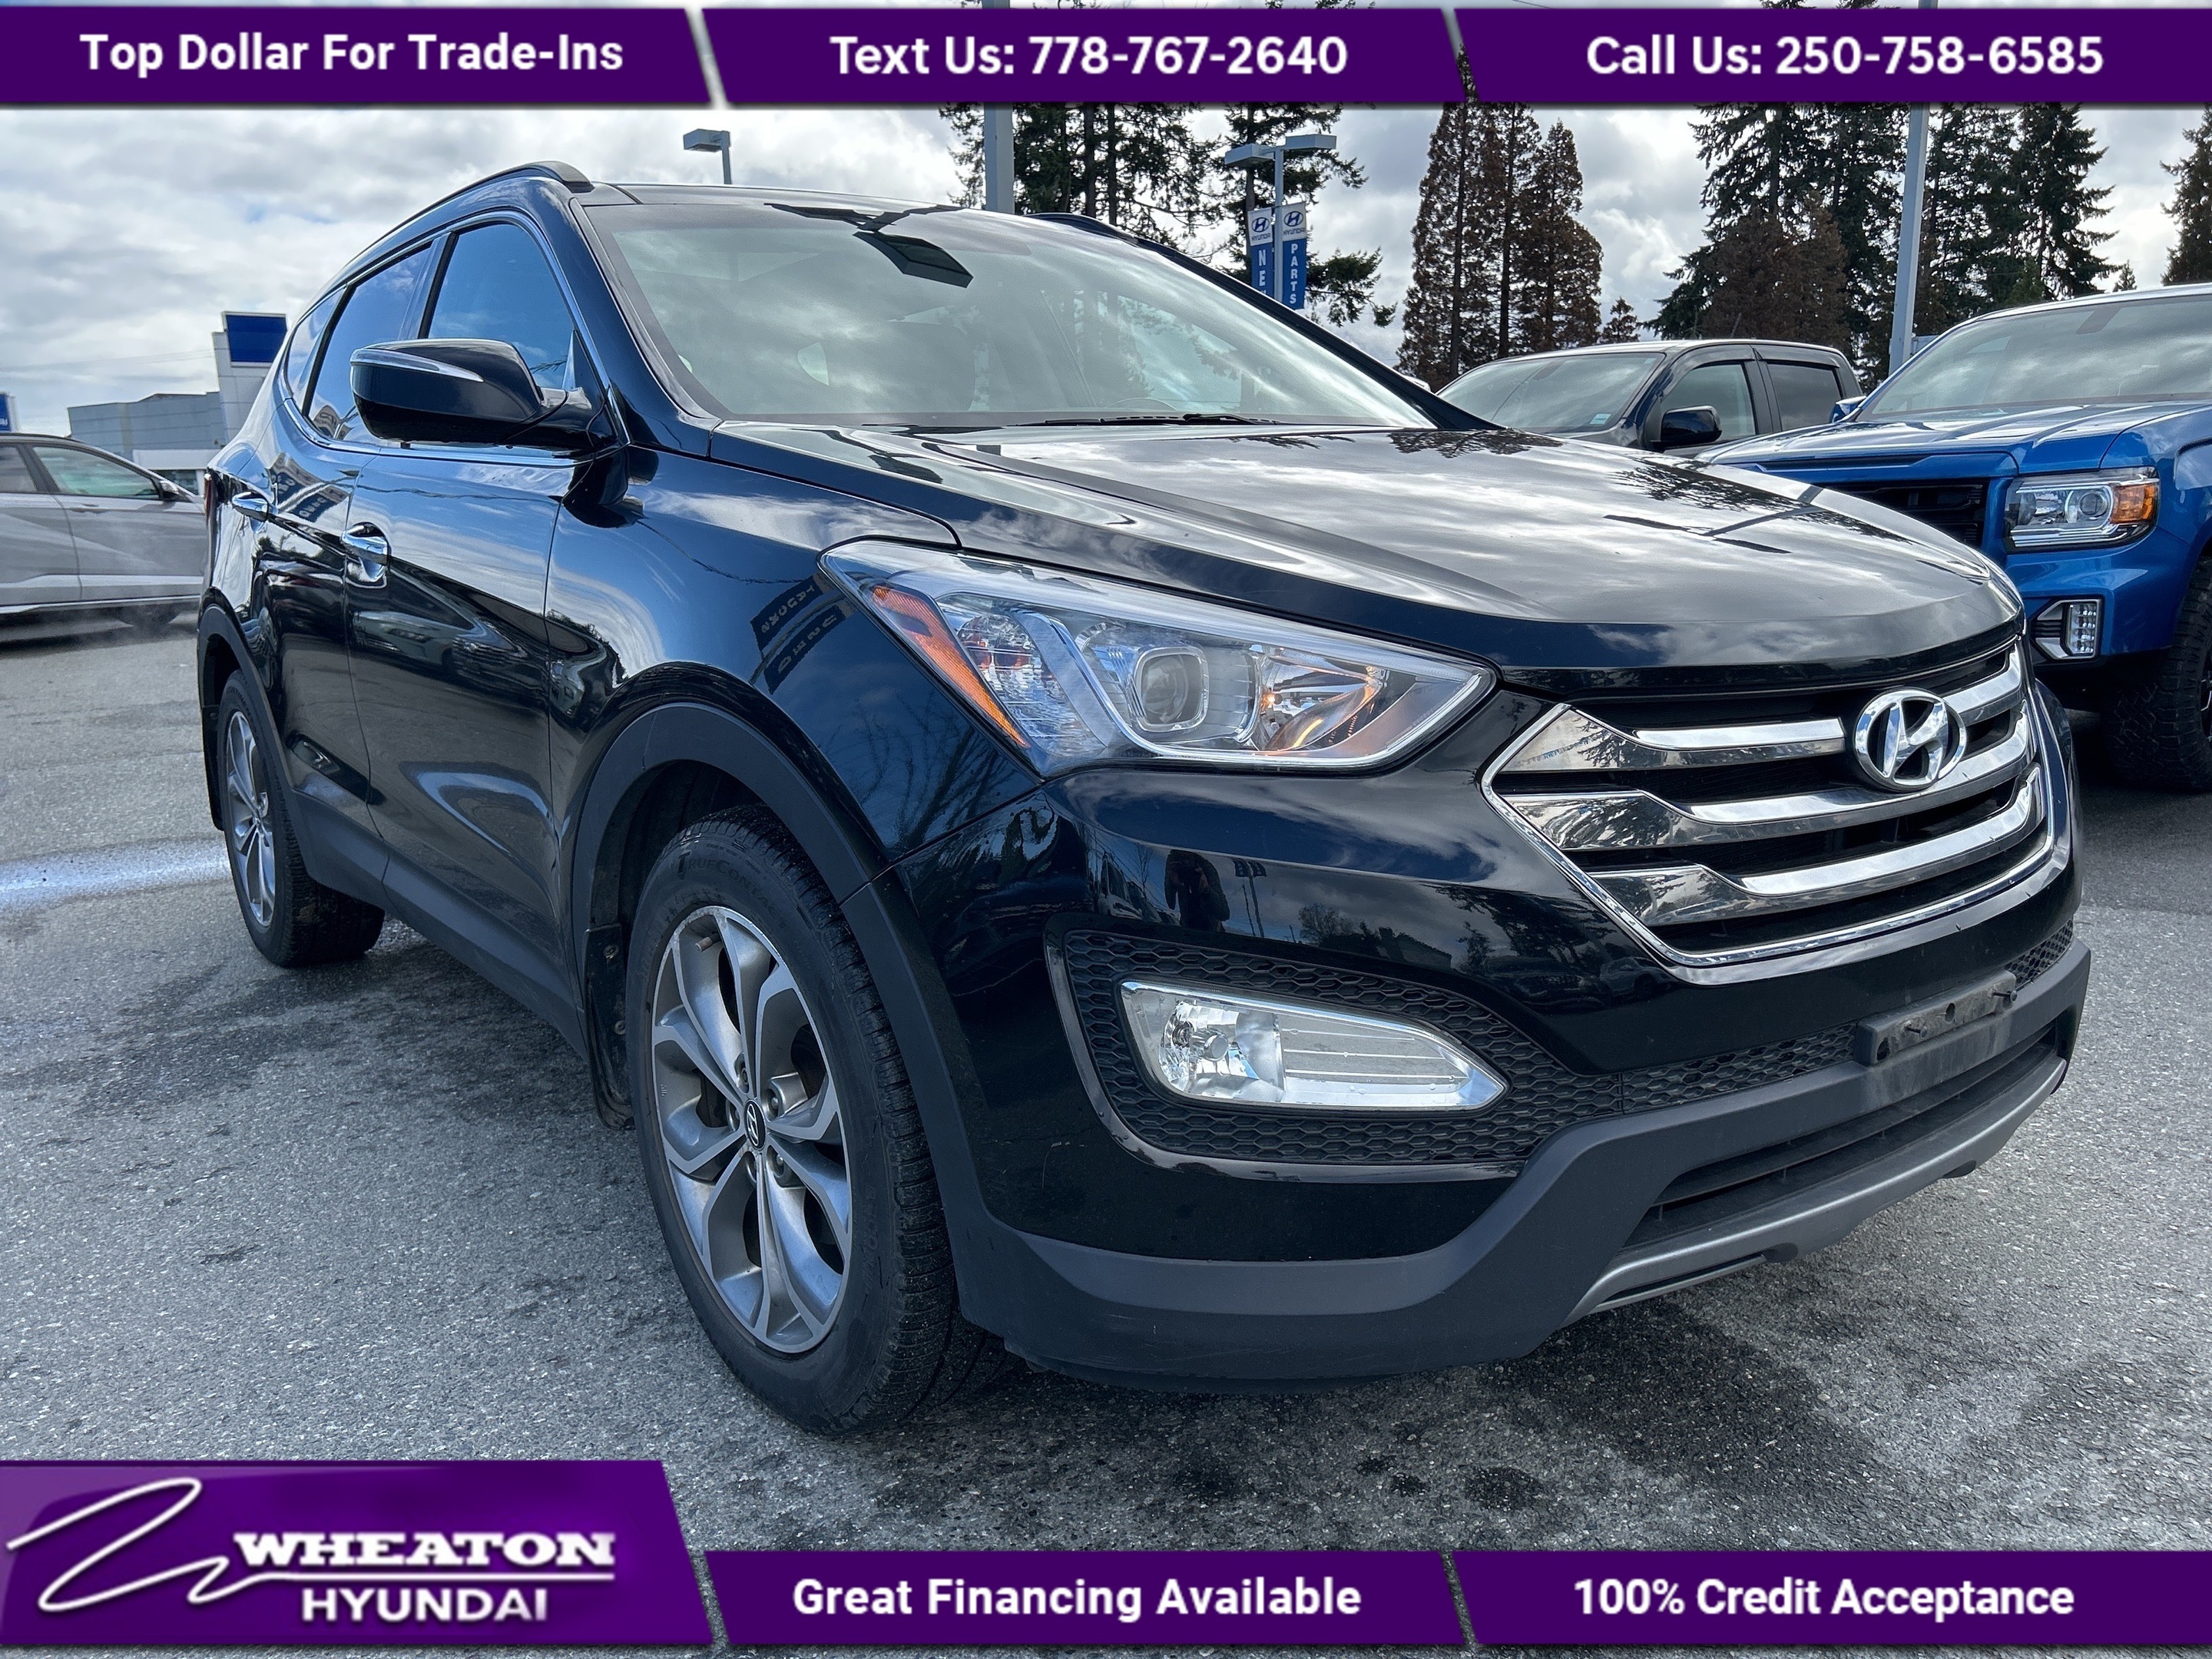 2014 Hyundai Santa Fe Sport Limited, One Owner, Local, Trade in, Navigation, L